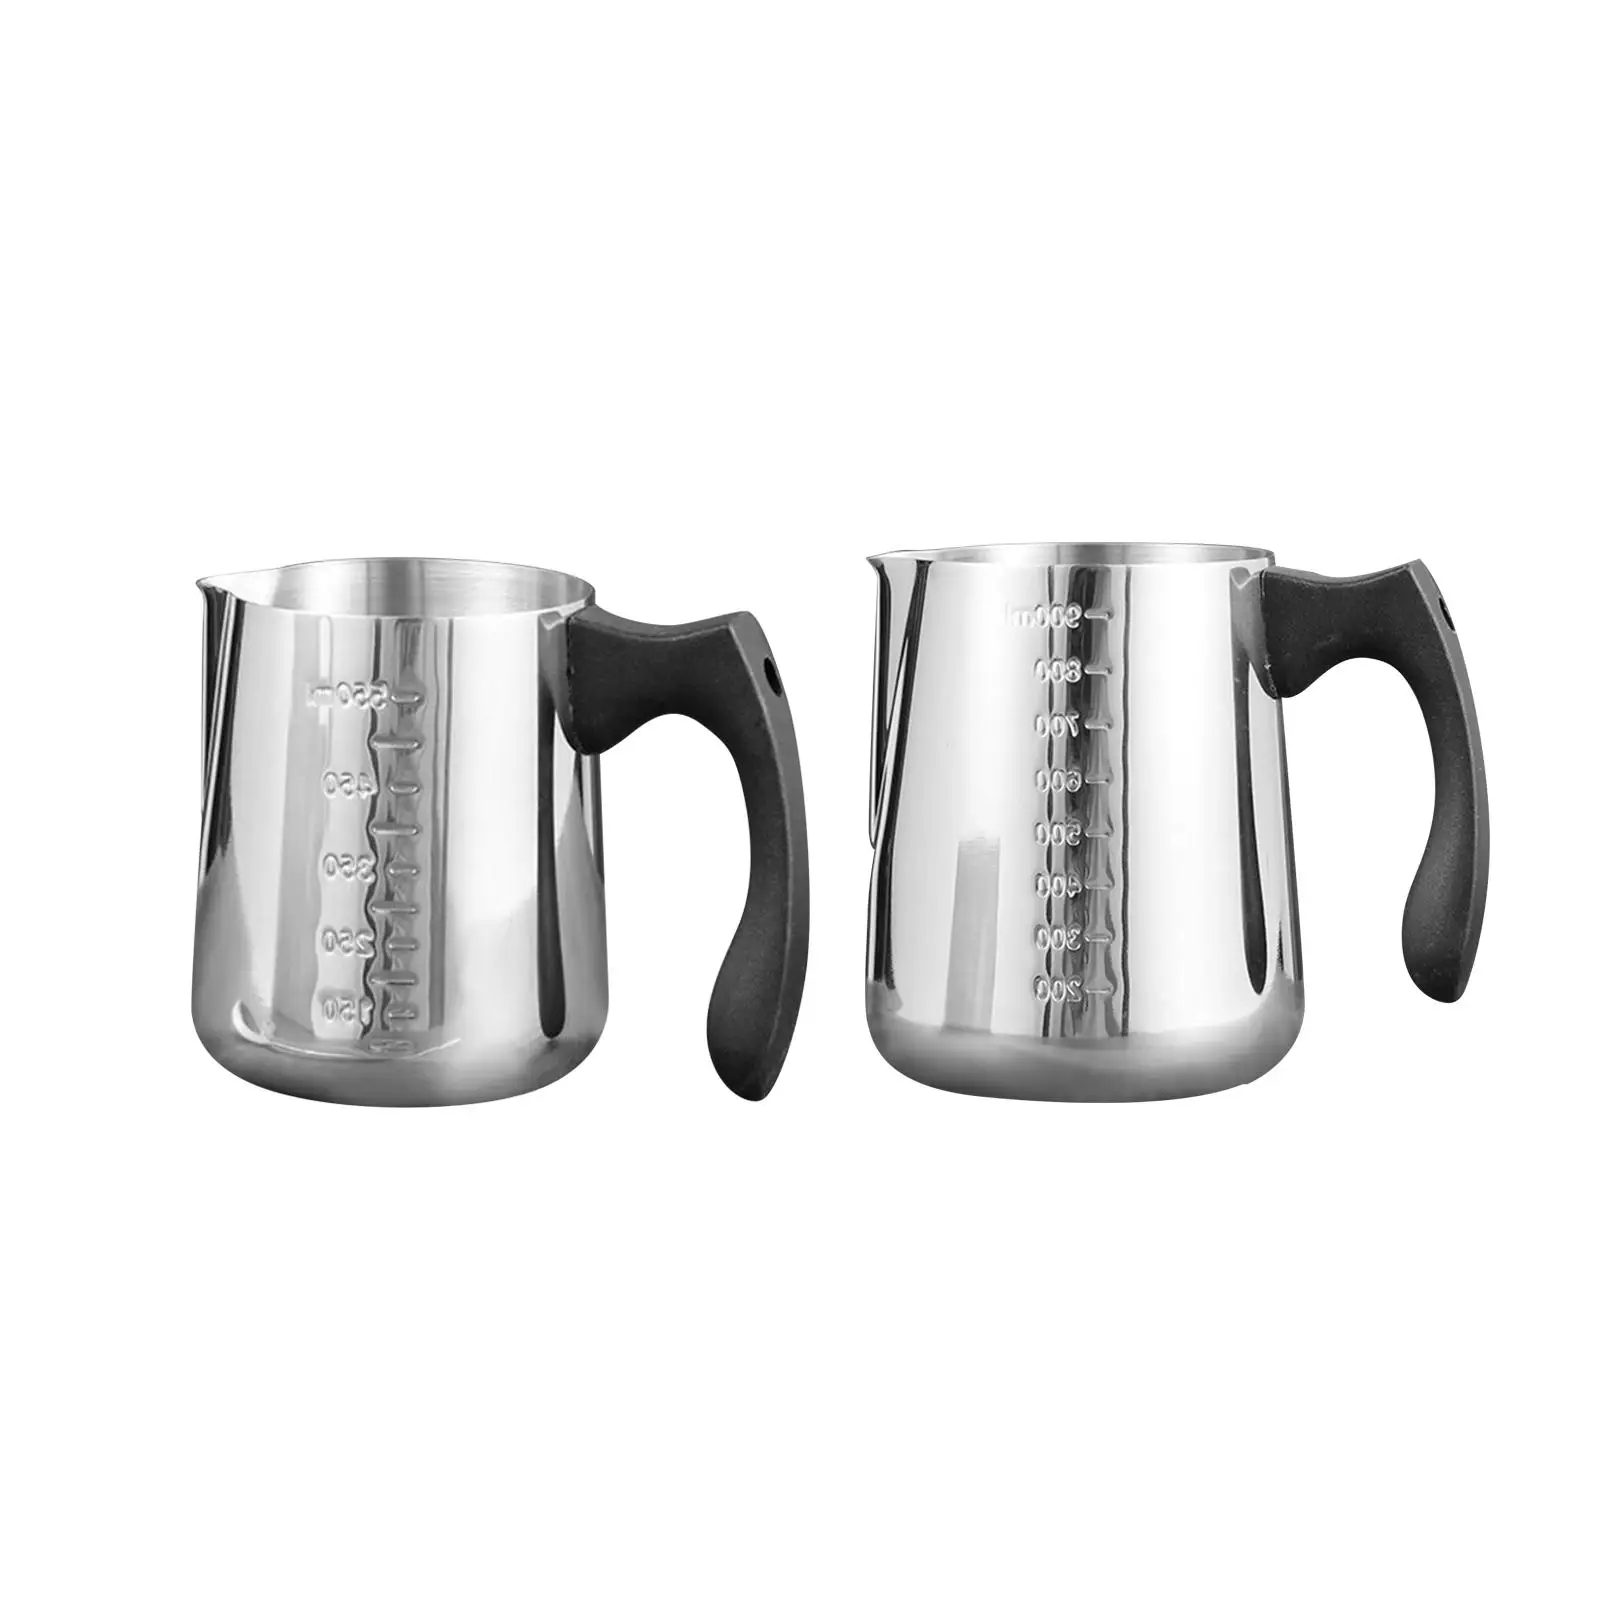 Multifunctional Milk Frothing Mug Espresso Steaming Cups Coffee Milk Frothing Jug Milk Jug Cup Coffeware for Party